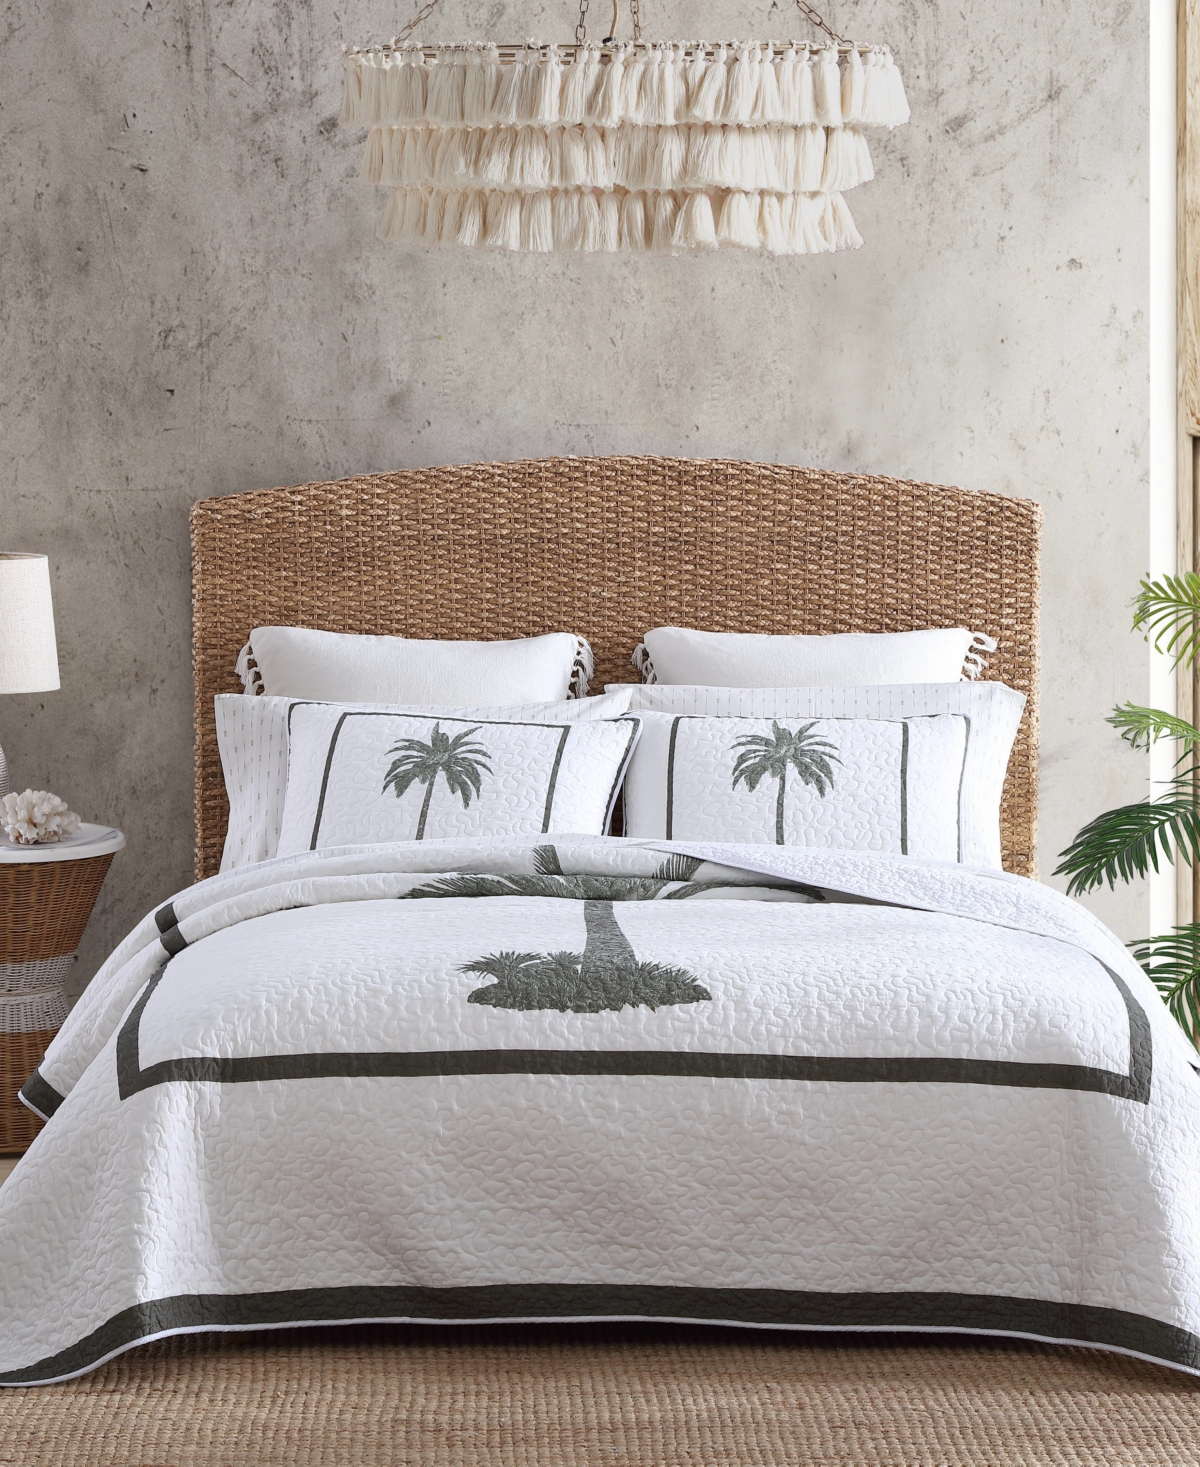 TOMMY BAHAMA HOME PALM ISLAND QUILT, FULL/QUEEN BEDDING